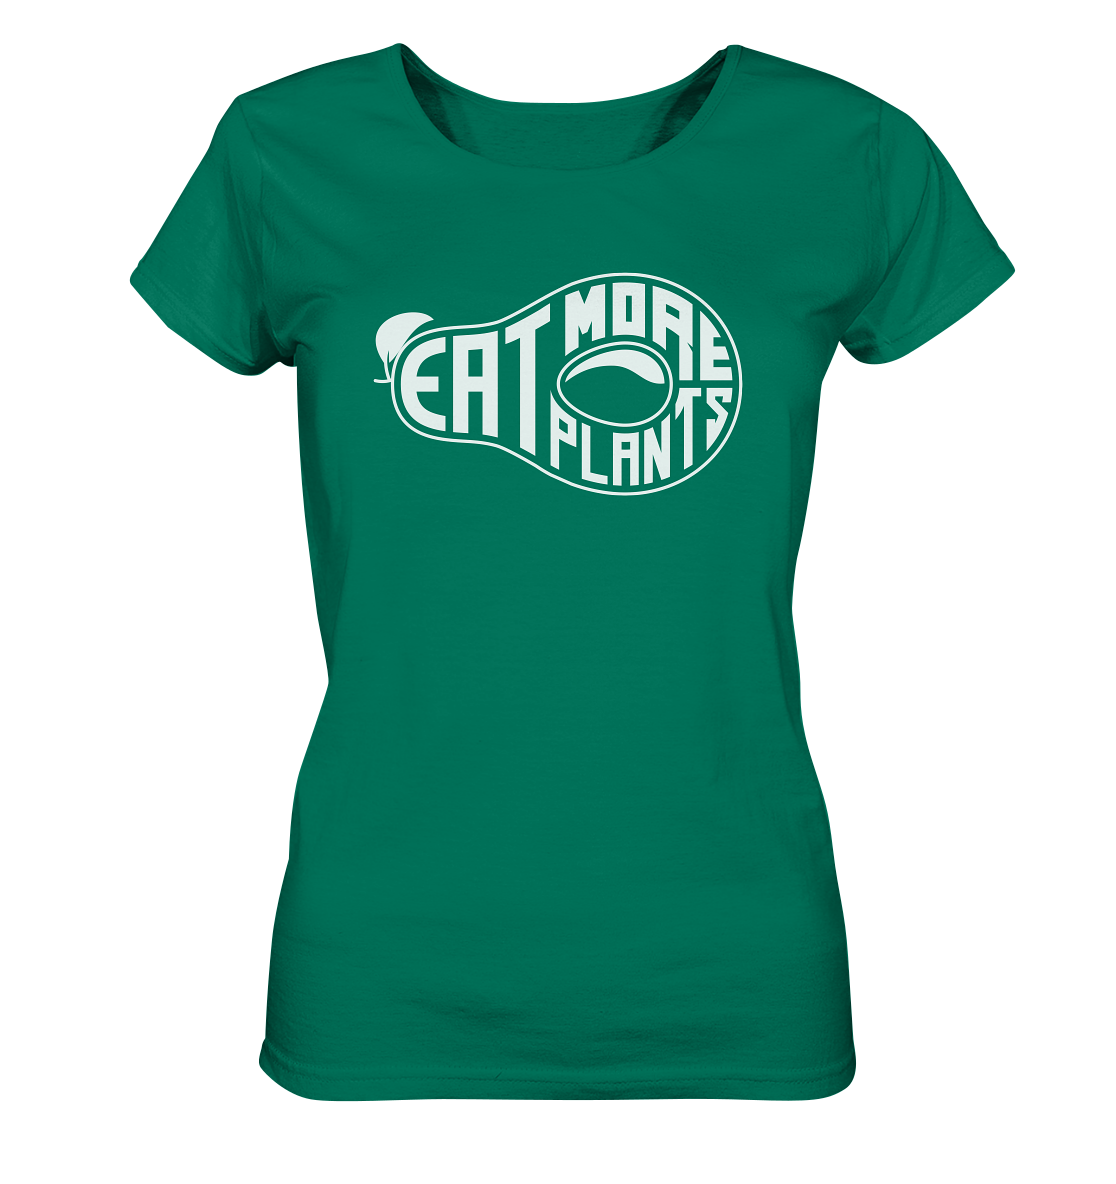 Organic ladies fitted scoop neck t-shirt in bright green saying Eat More Plants